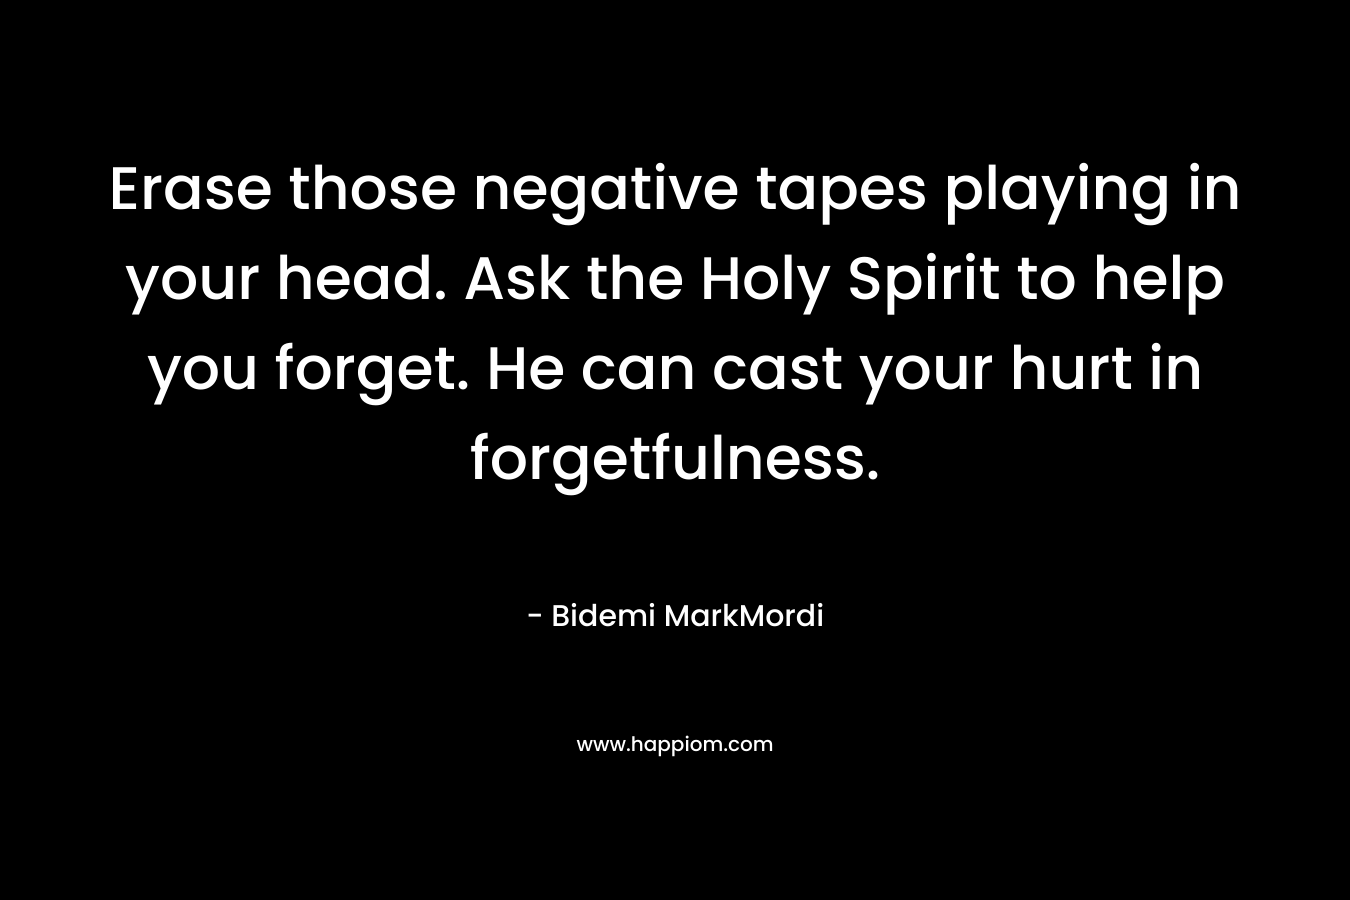 Erase those negative tapes playing in your head. Ask the Holy Spirit to help you forget. He can cast your hurt in forgetfulness. – Bidemi MarkMordi